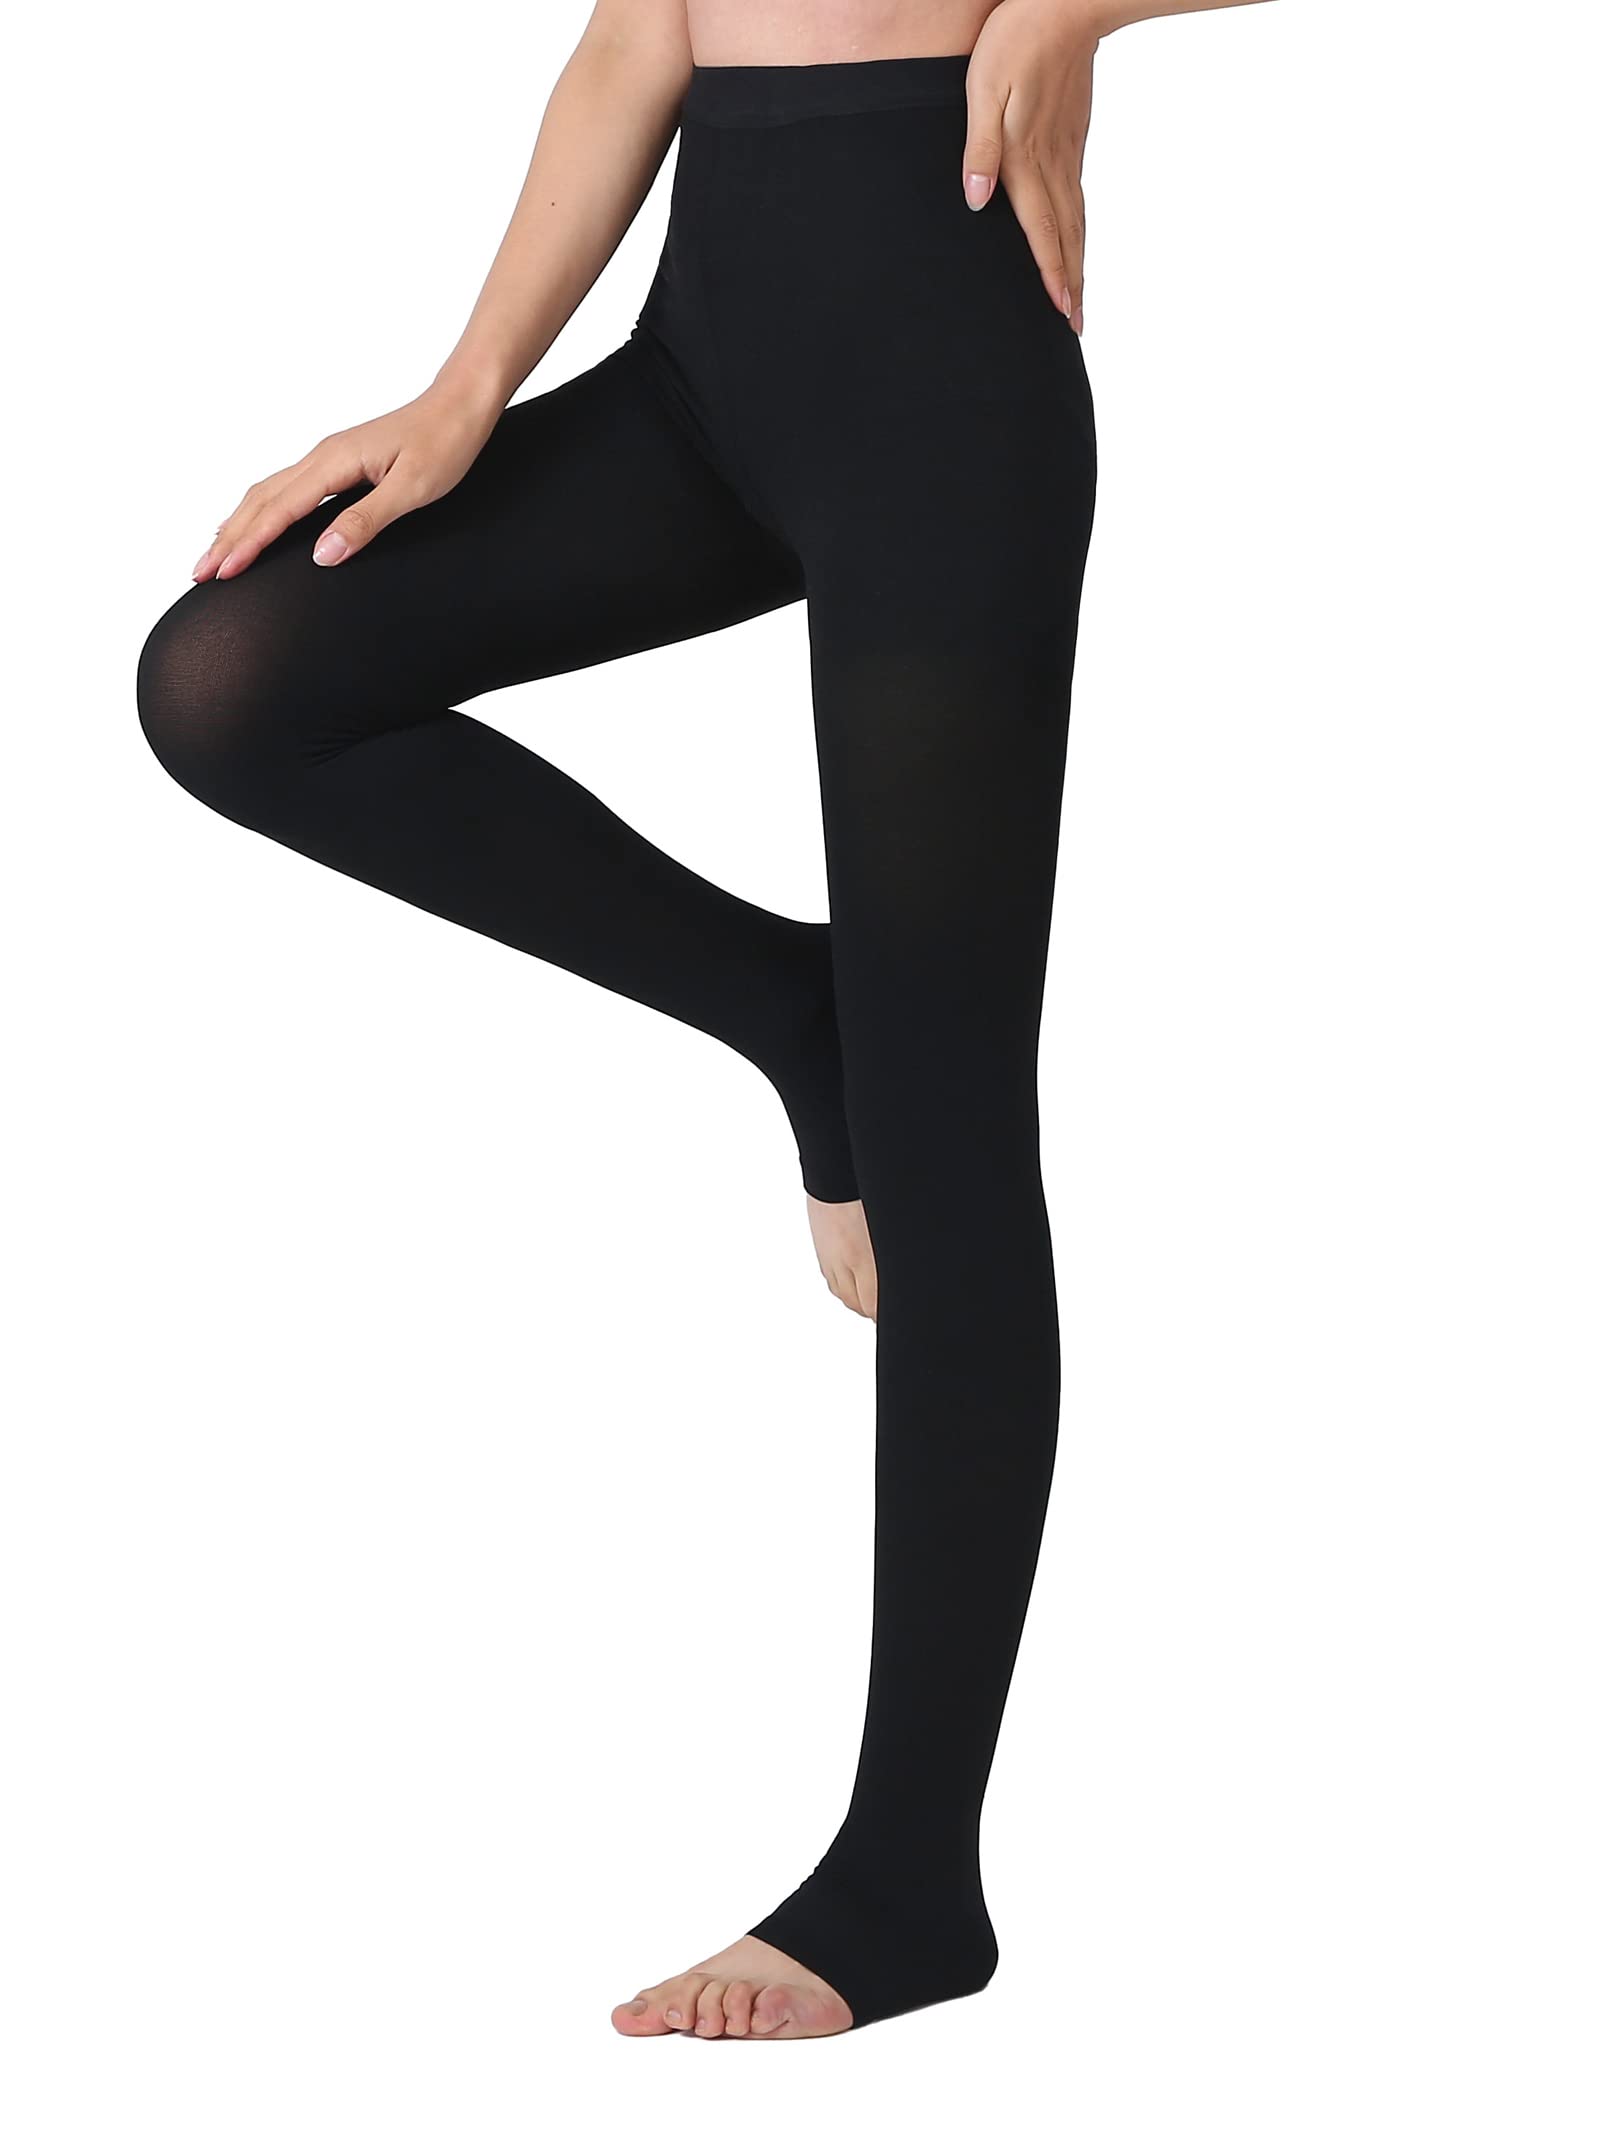  Plus Size Opaque Compression Tights For Women 20-30mmHg - Footless  Compression Pantyhose For Circulation During Travel